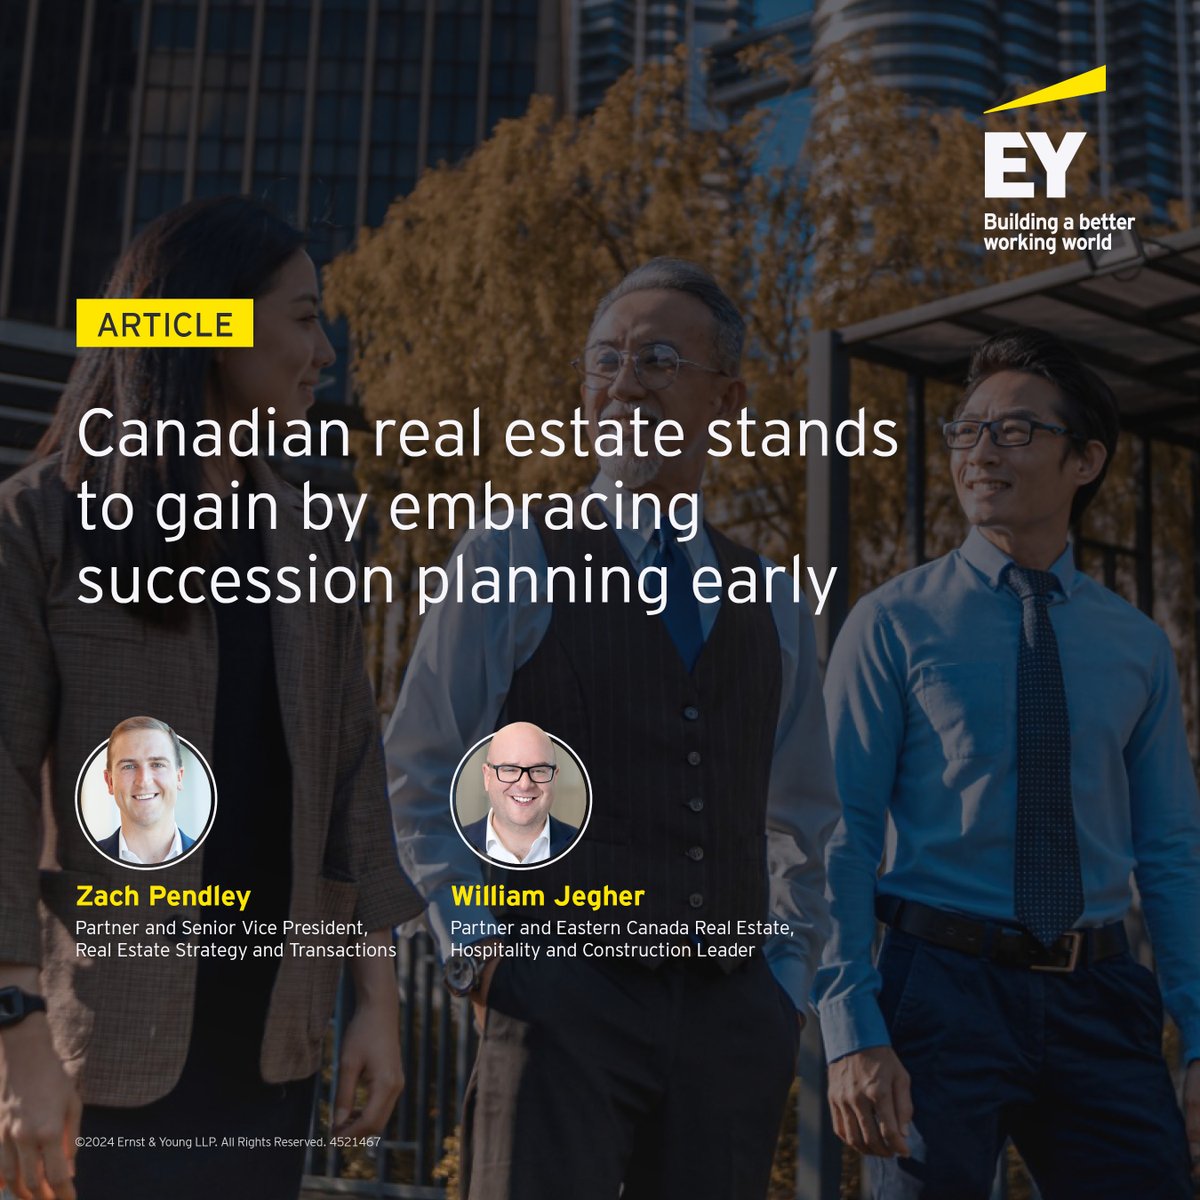 EY’s three-phased approach to succession planning can help you safeguard operational continuity, align leadership transition with your goals and cultivates future leaders. Empower your legacy today: go.ey.com/4b3lpAk

#EYCanada